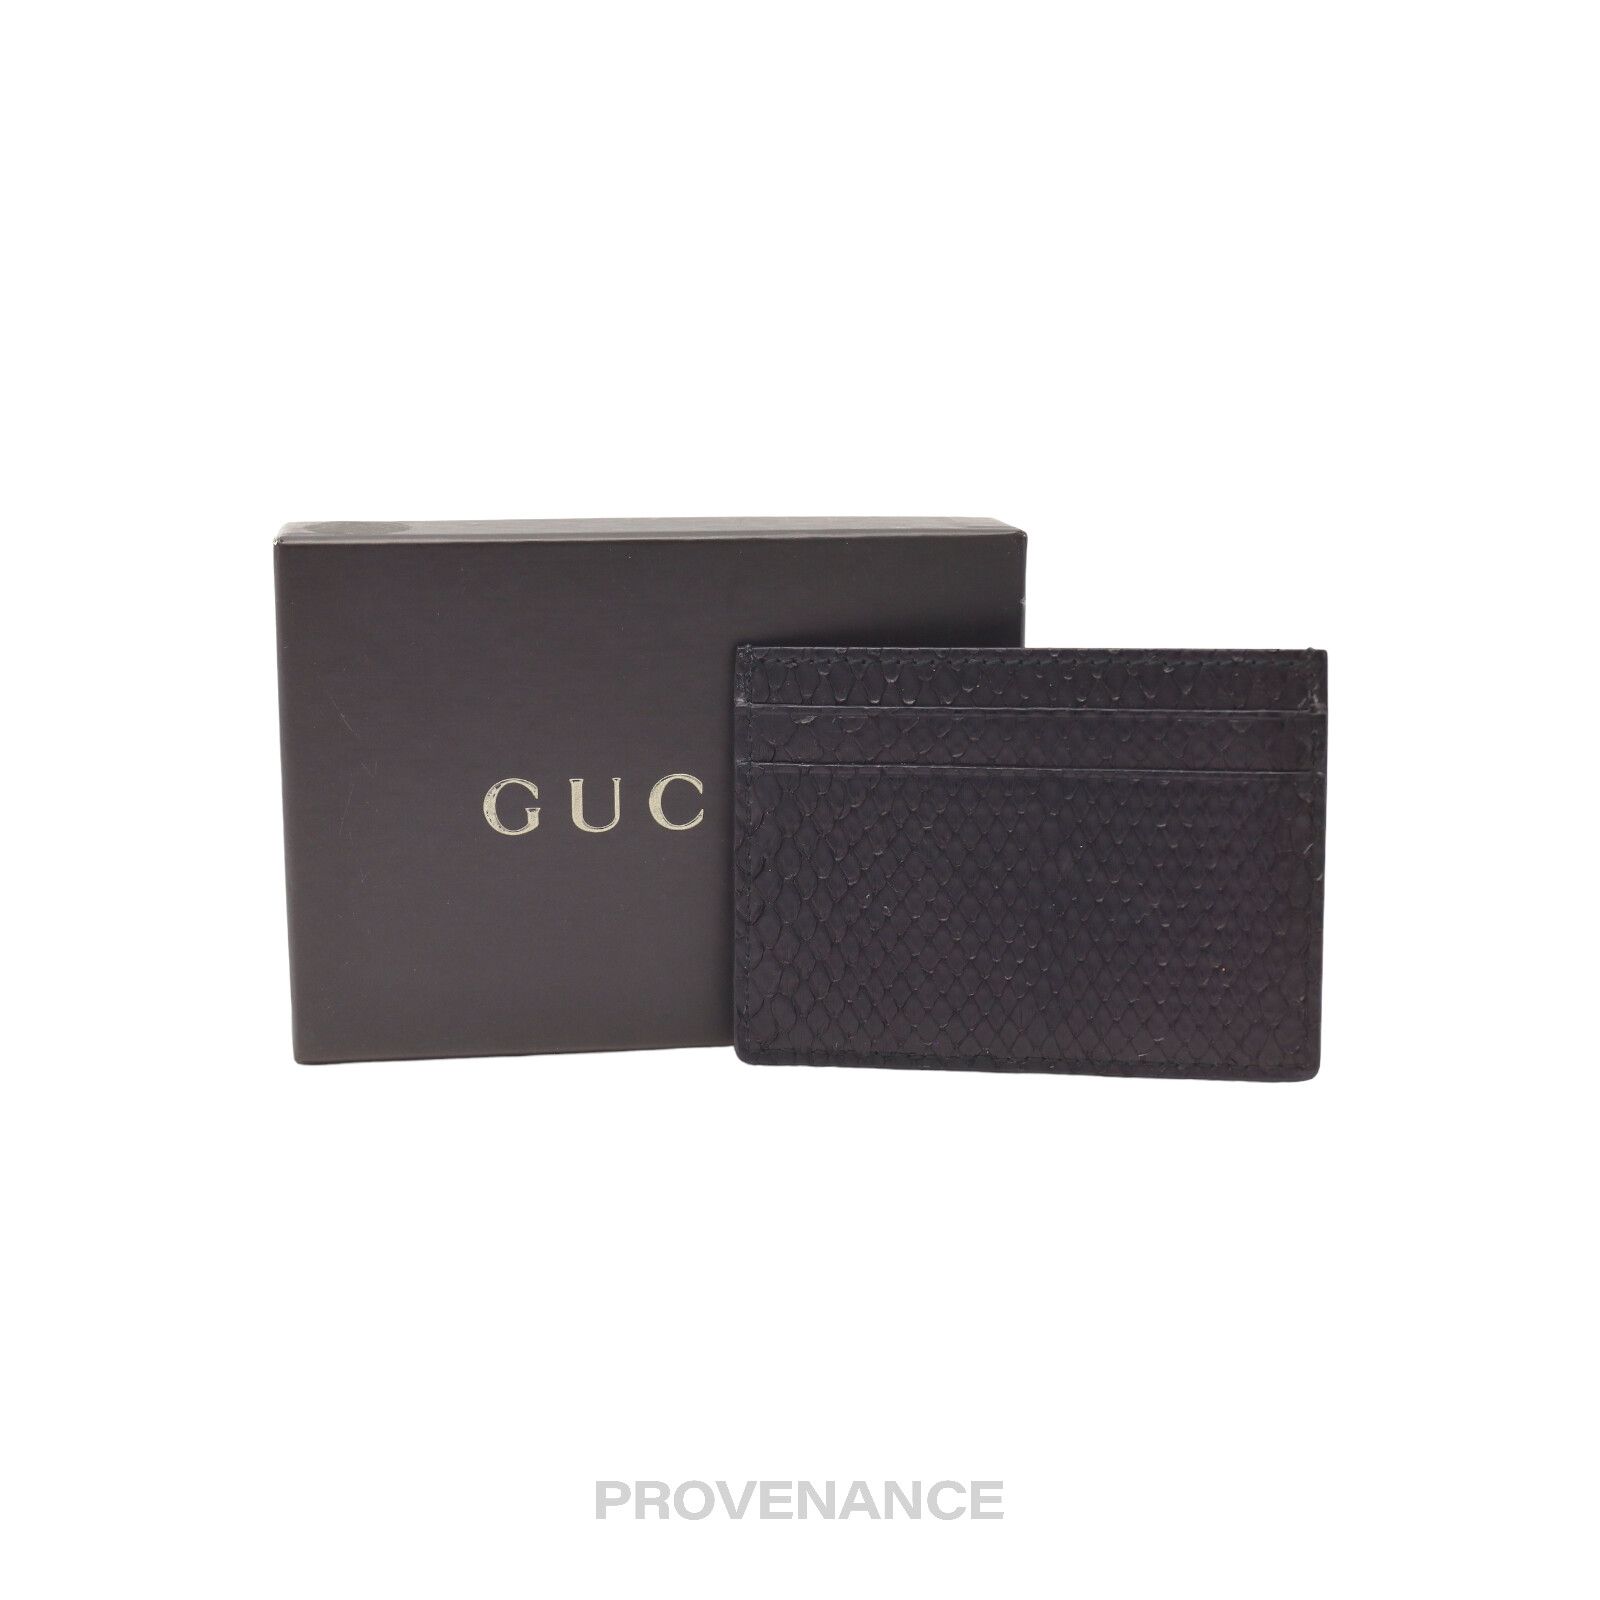 GUCCI Card Holder Canvas Leather Bifold Black Wallet Made in Italy  Authentic Guc